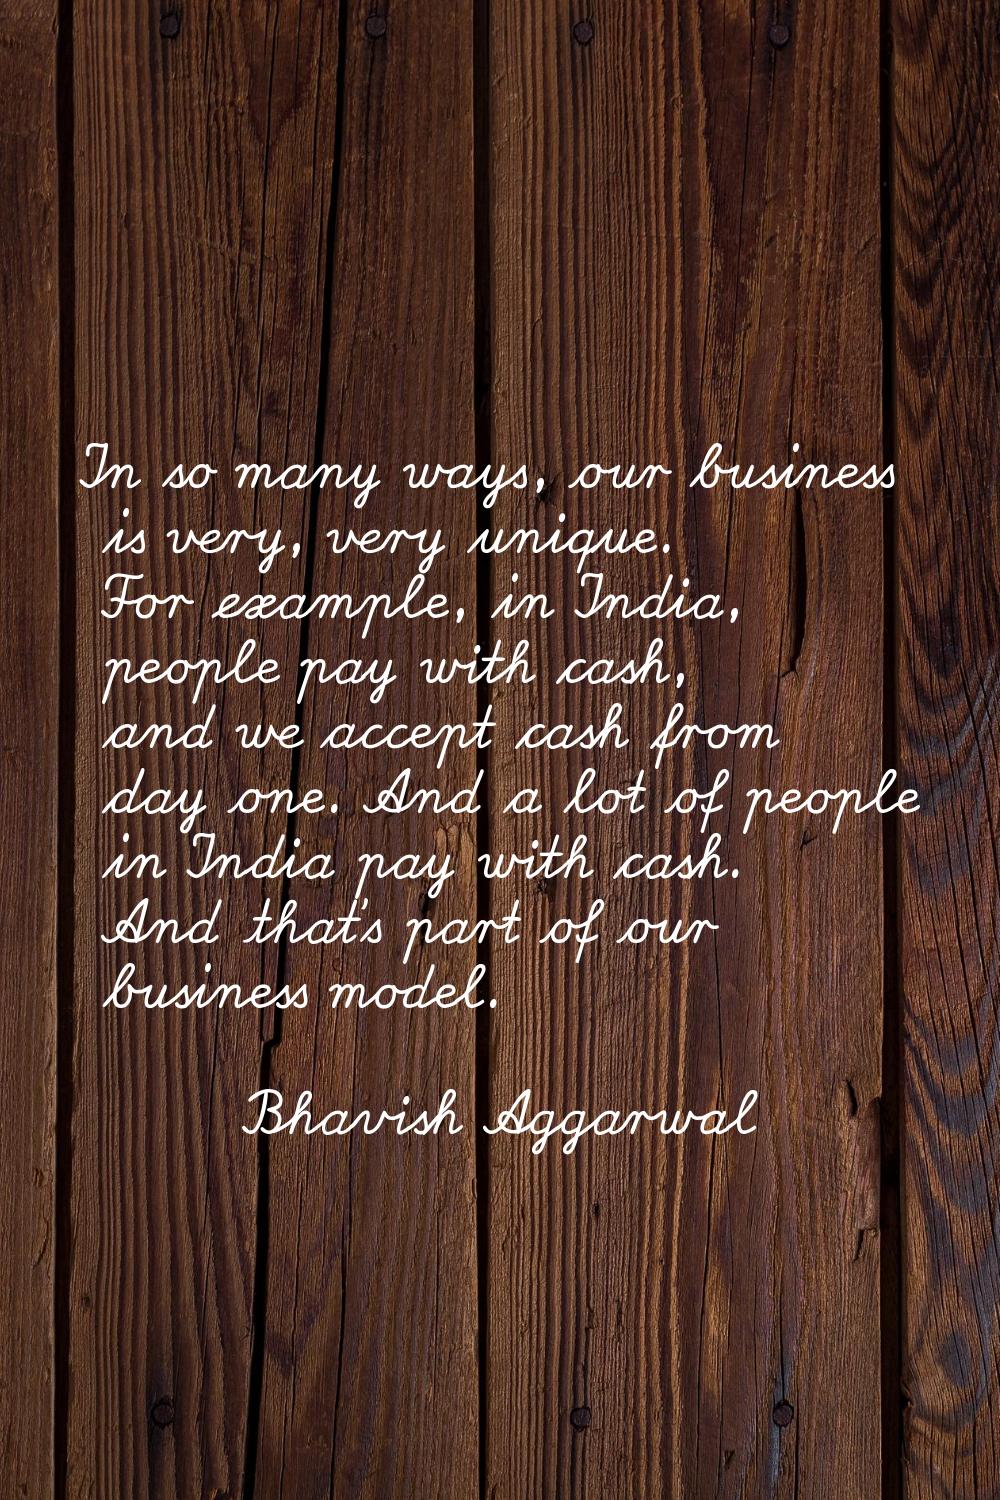 In so many ways, our business is very, very unique. For example, in India, people pay with cash, an